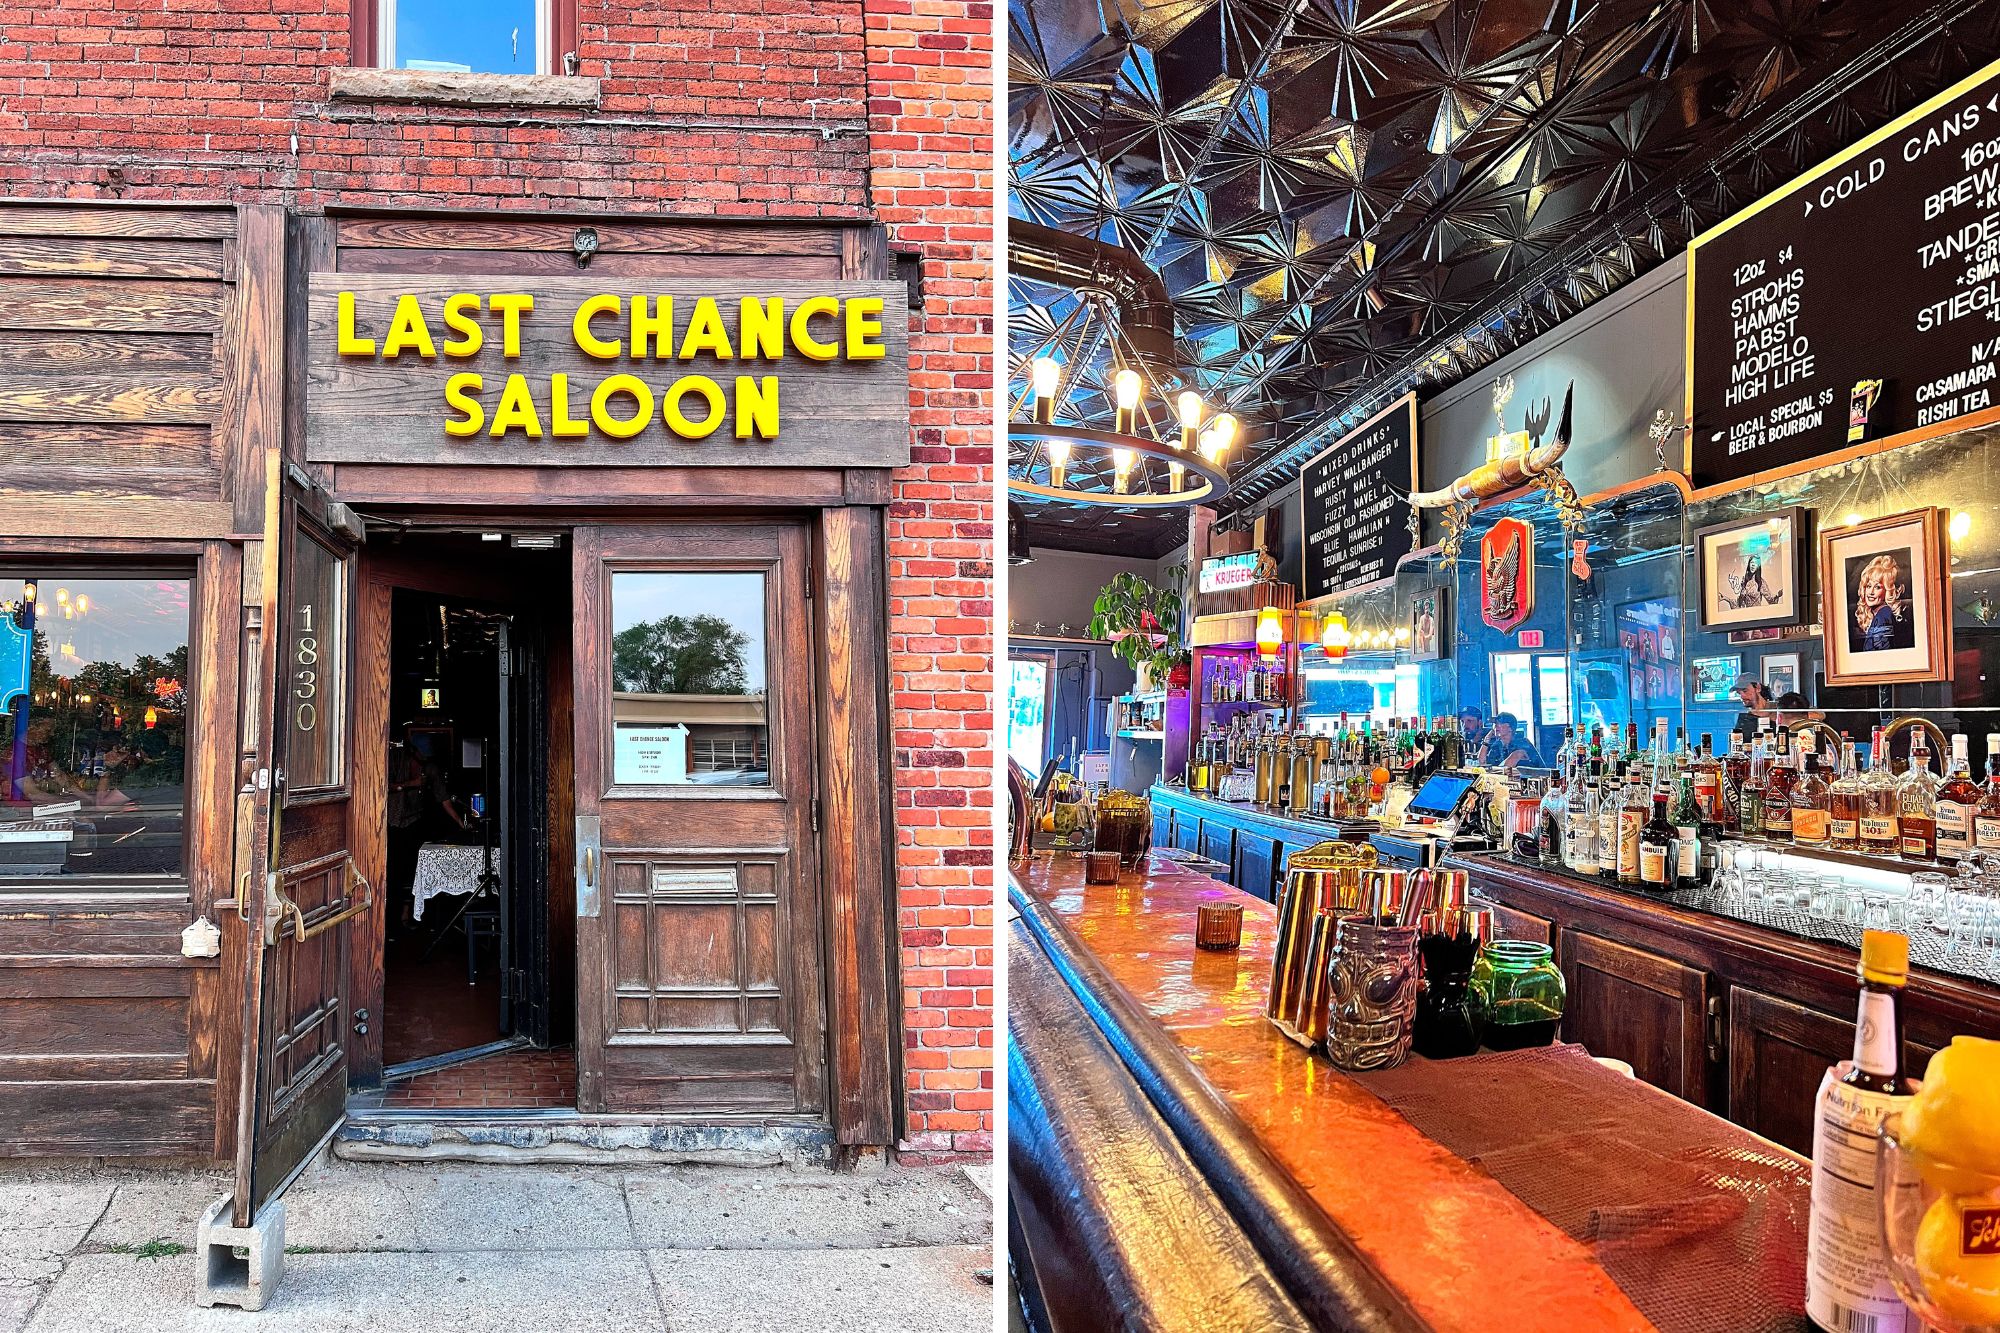 Exterior and interior of Last Chance Saloon in Detroit